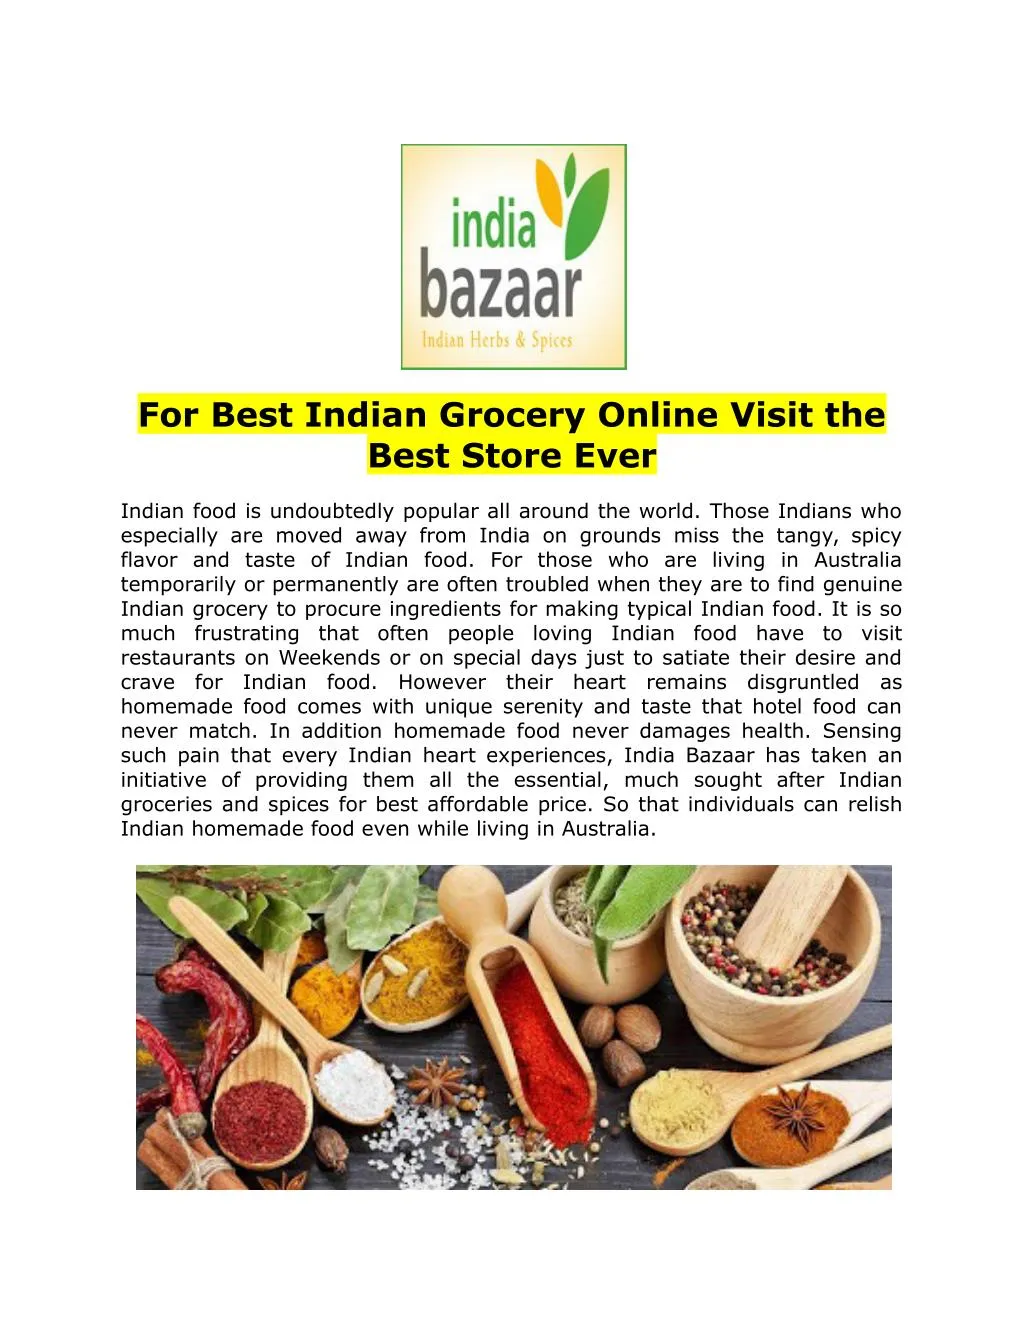 for best indian grocery online visit the best